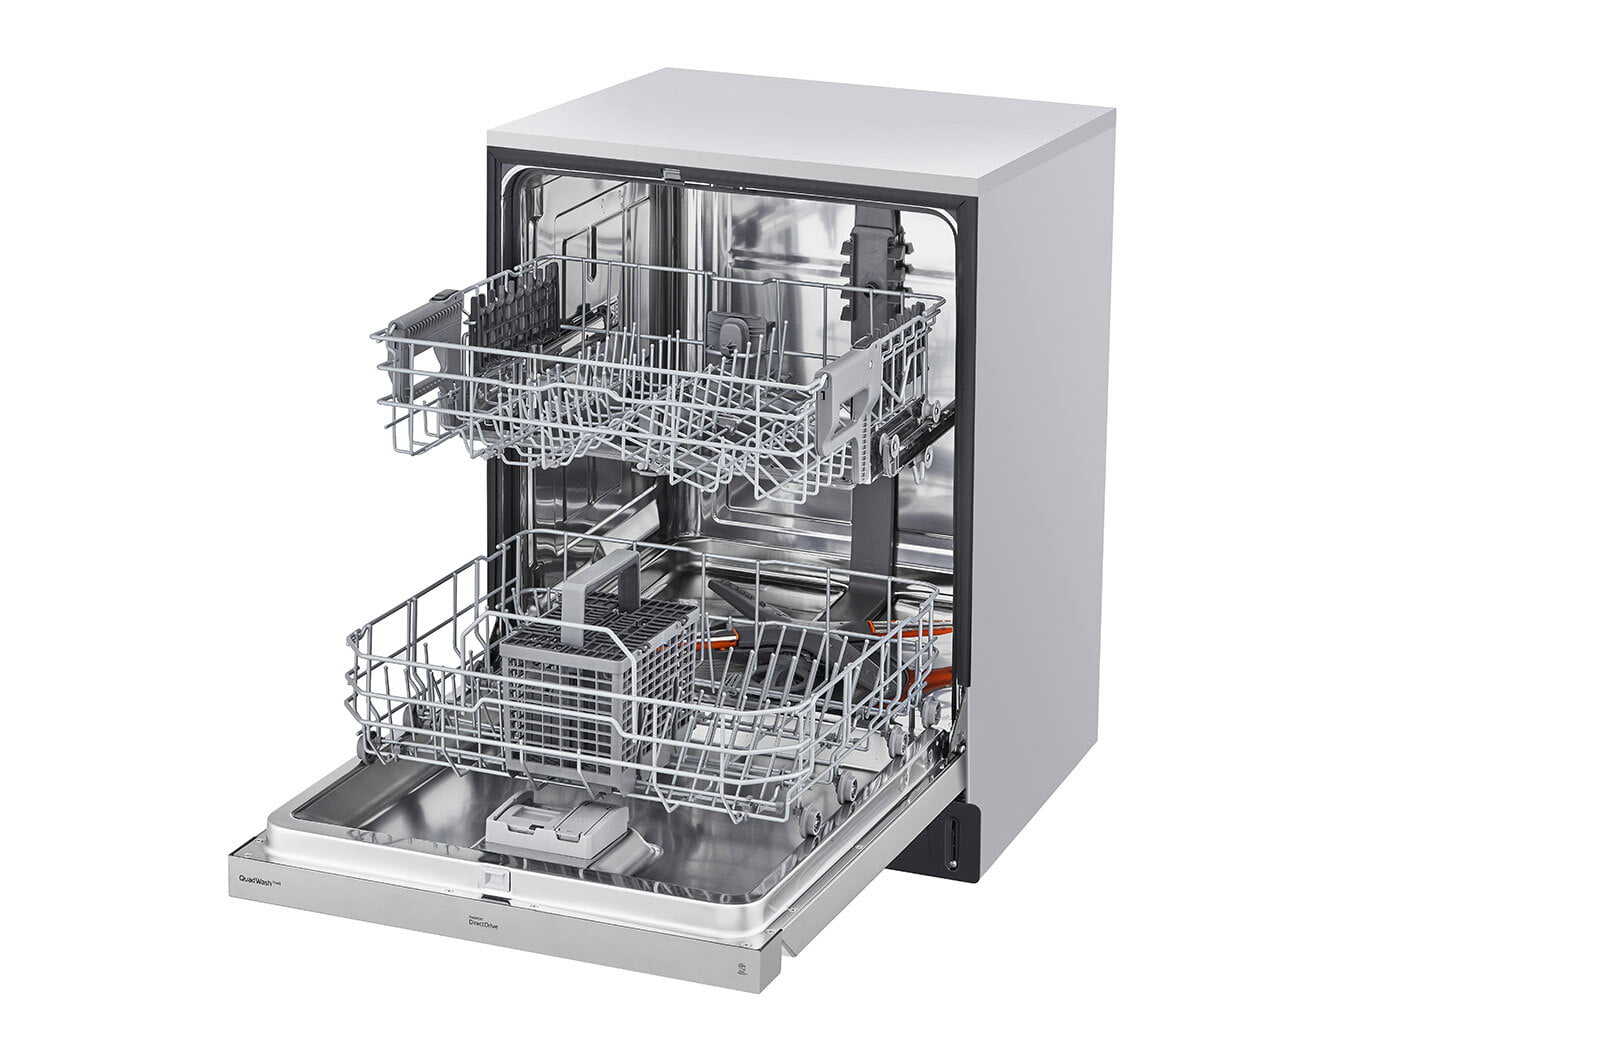 Lg ADFD5448AT Front Control Smart Wi-Fi Enabled Dishwasher With Quadwash™